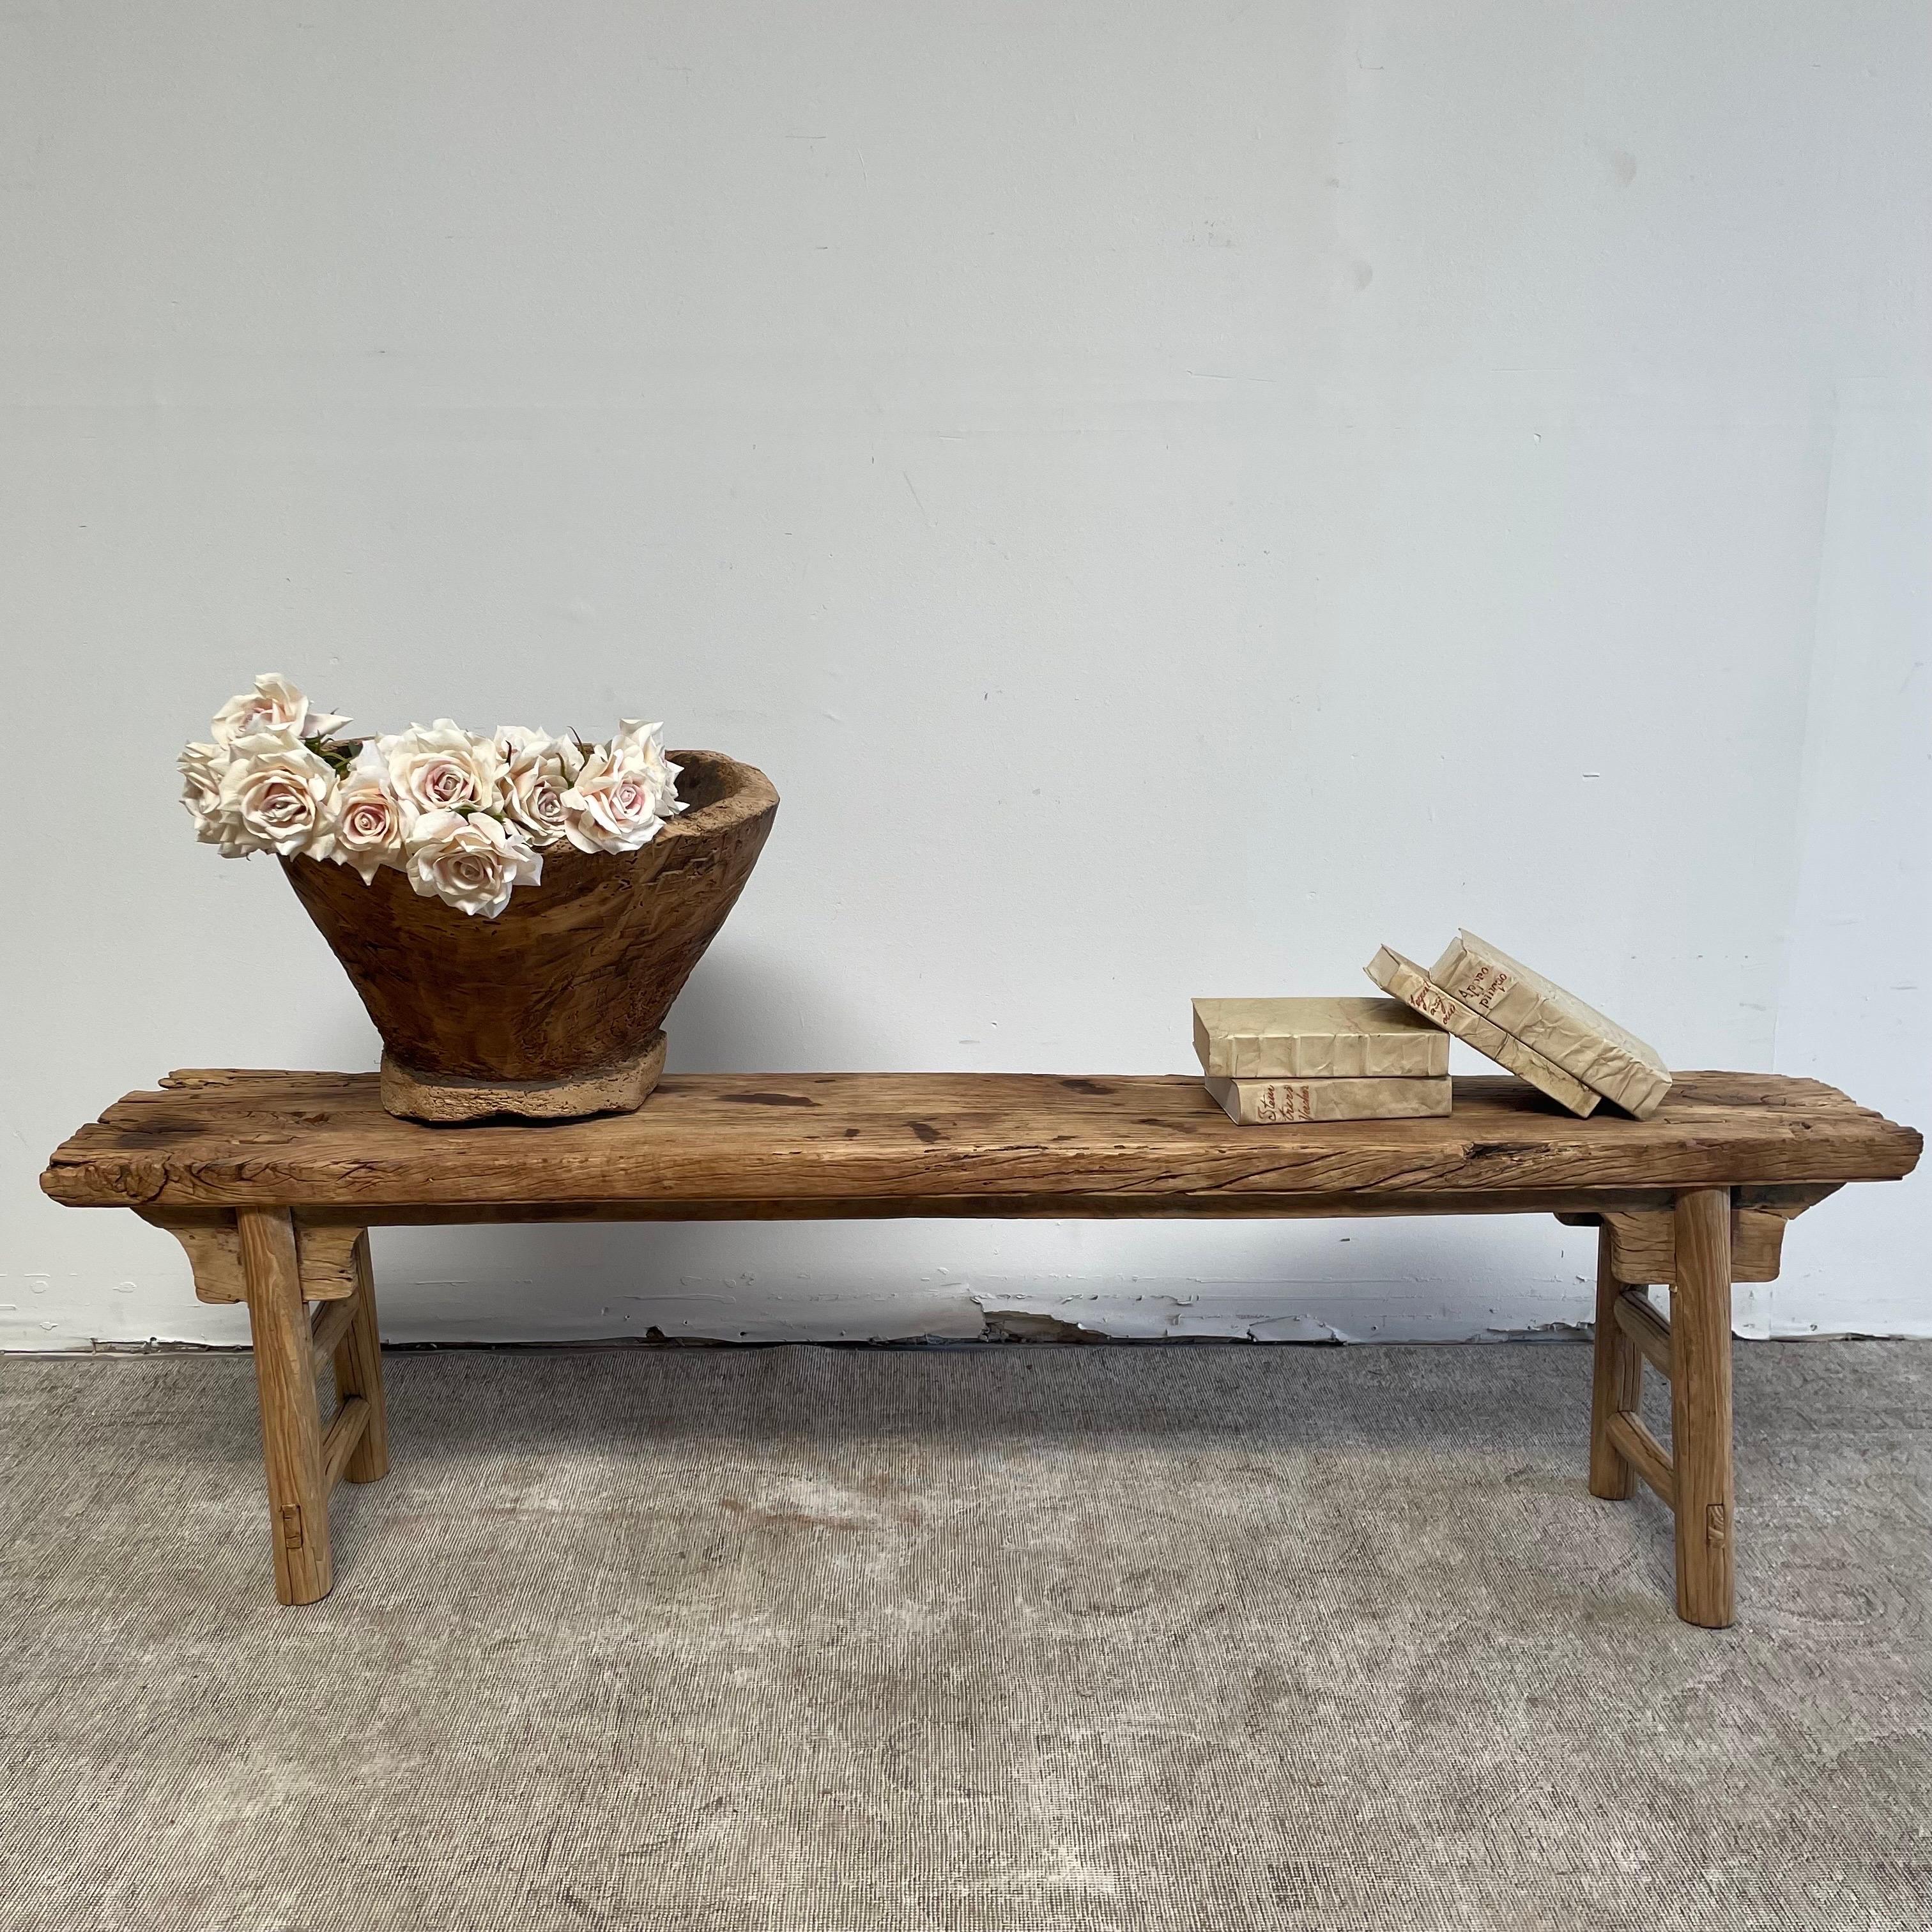 Vintage Antique Elm Wood bench These are the real vintage antique elm wood benches! Beautiful antique patina, with weathering and age, these are solid and sturdy ready for daily use, use as as a table behind a sofa, stool, coffee table, they are